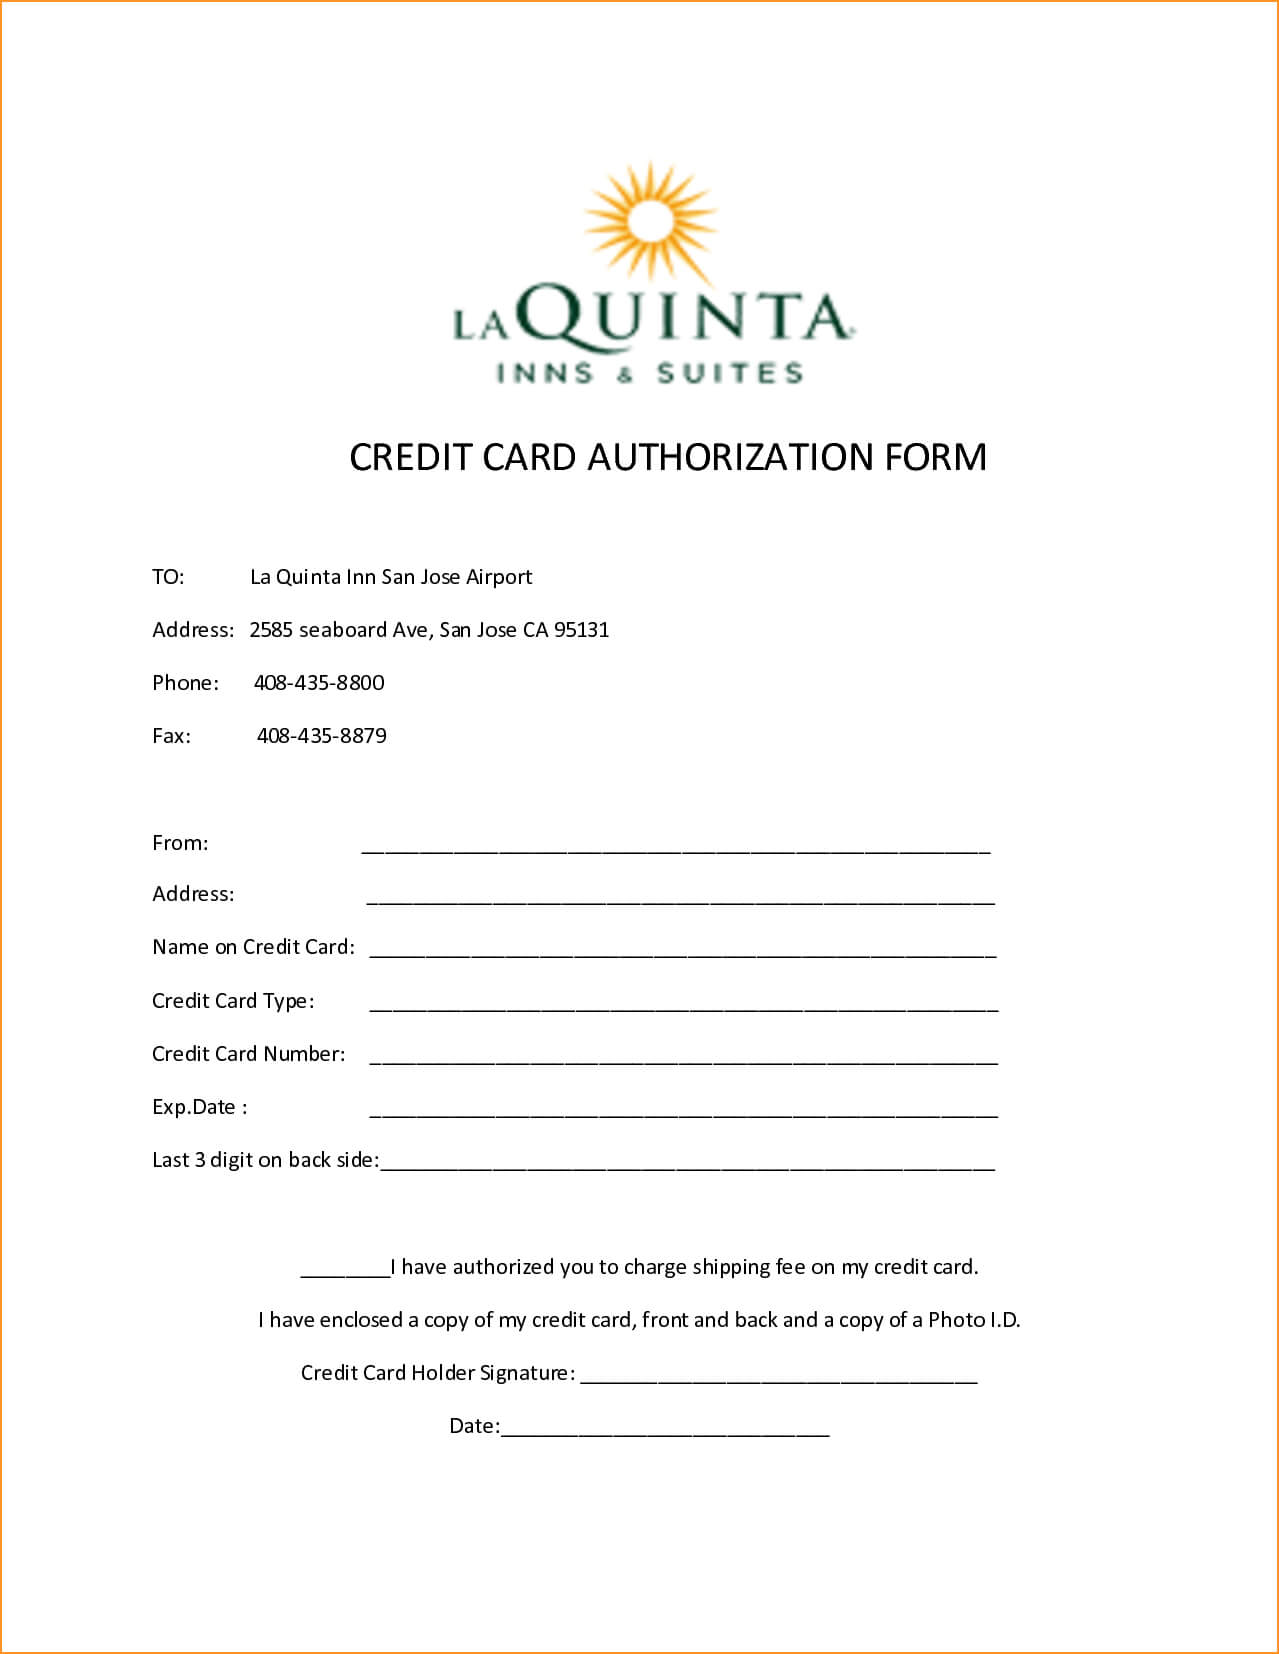 Hotel Credit Card Authorization Form.68218447 | Manager Pertaining To Hotel Credit Card Authorization Form Template